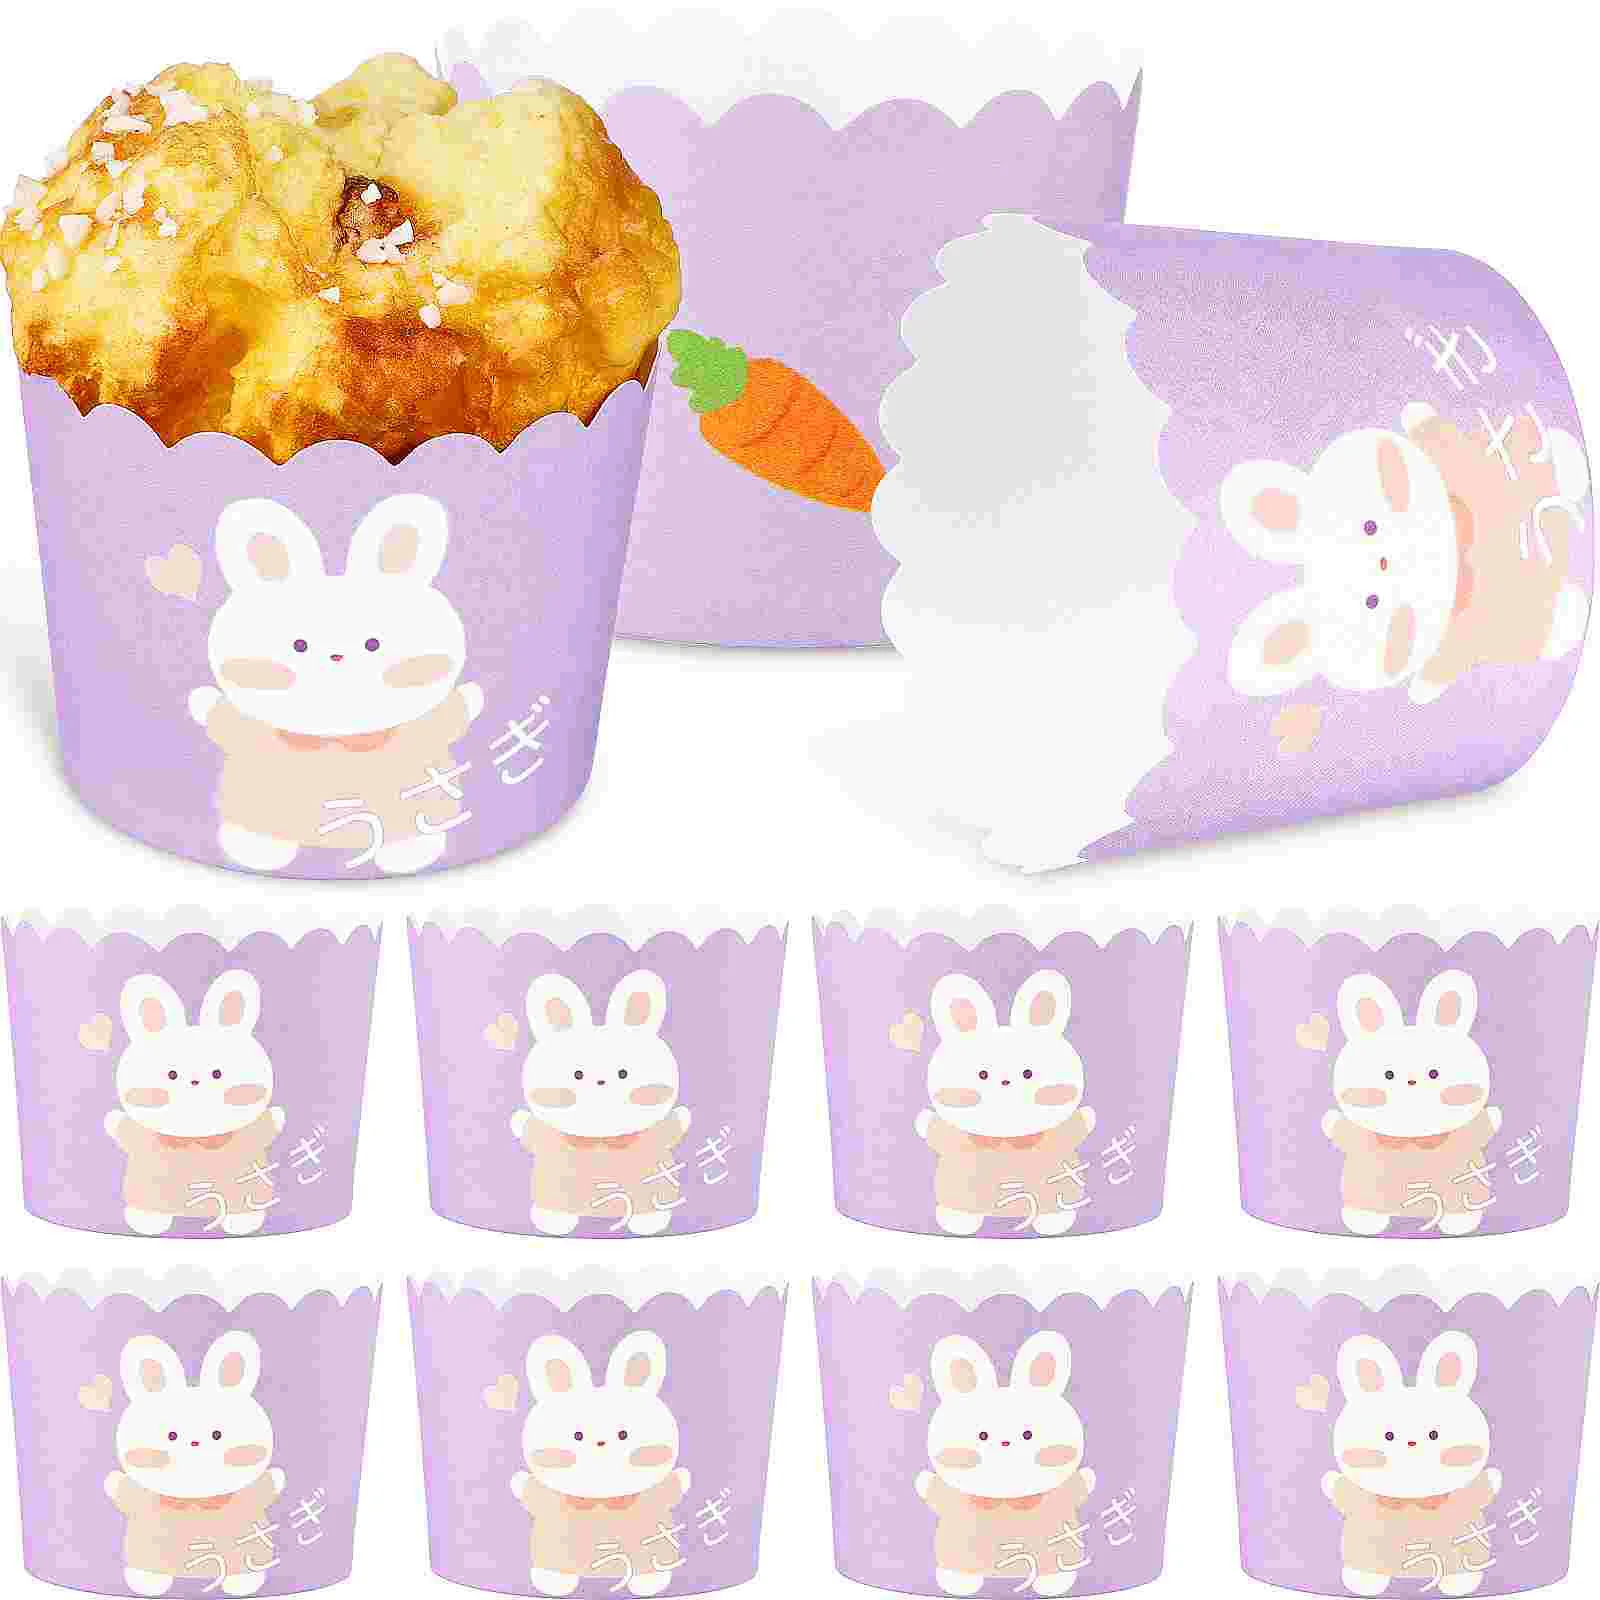 

100 Pcs Greaseproof Small Practical Rabbit Pattern Baking Cups Cupcake Liners Cupcake Wrapper Liners Muffin Cups Liners